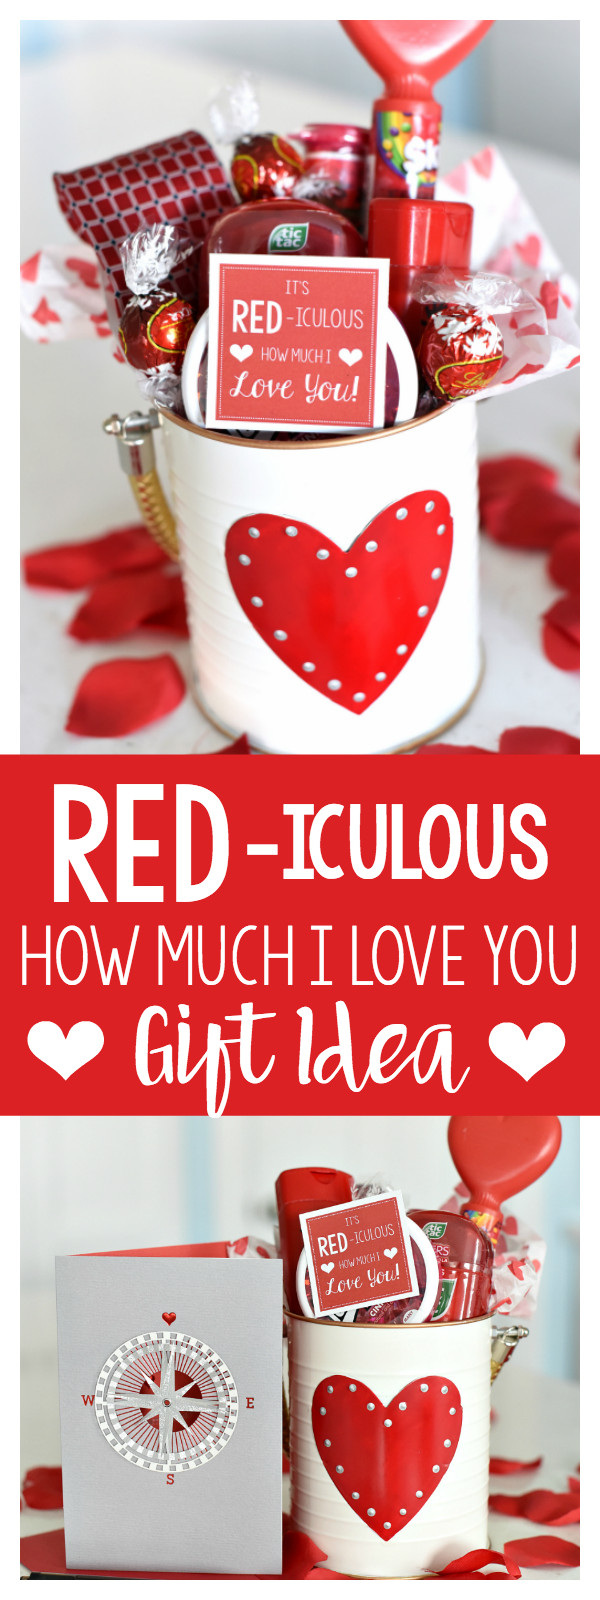 Valentines Day Gift Ideas Pinterest
 Cute Valentine s Day Gift Idea RED iculous Basket